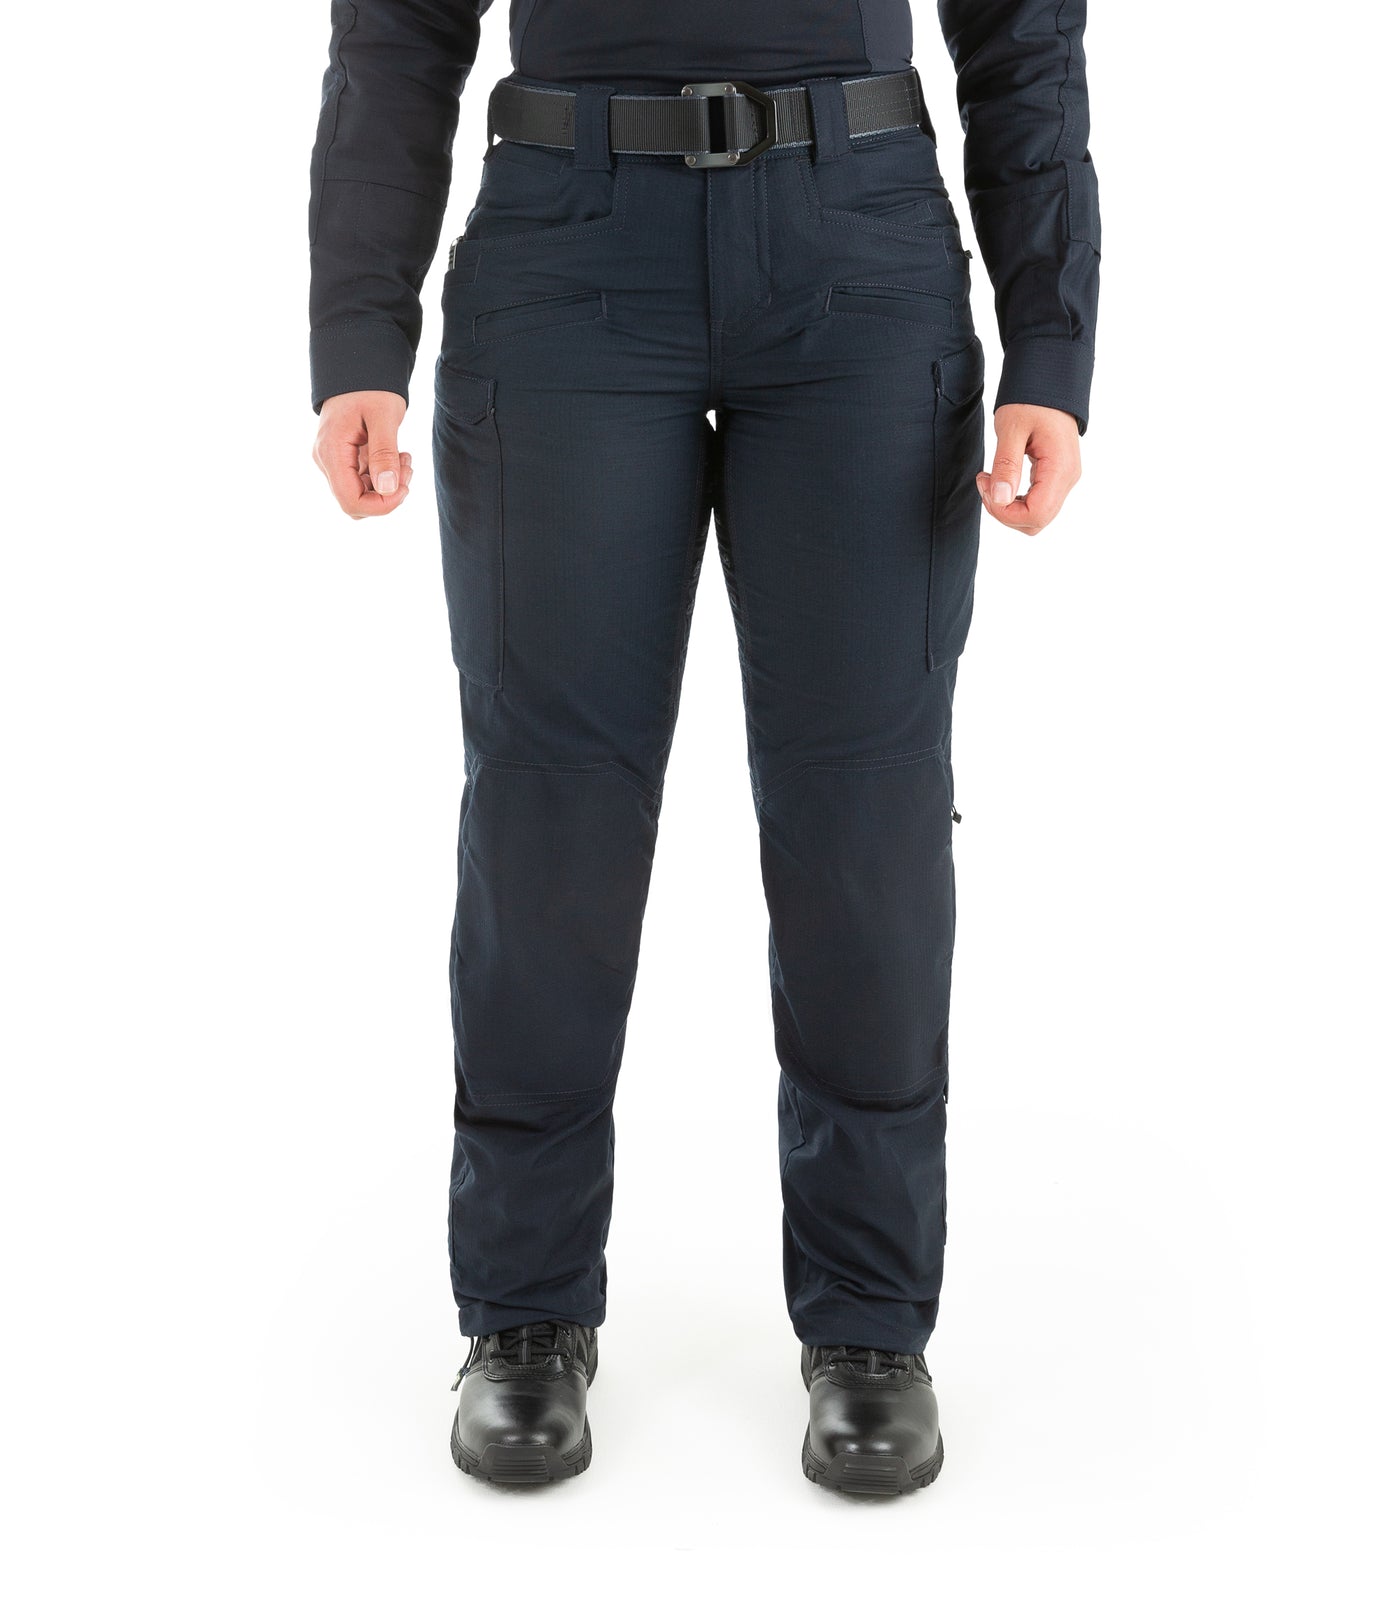 Women's Defender Pant – First Tactical